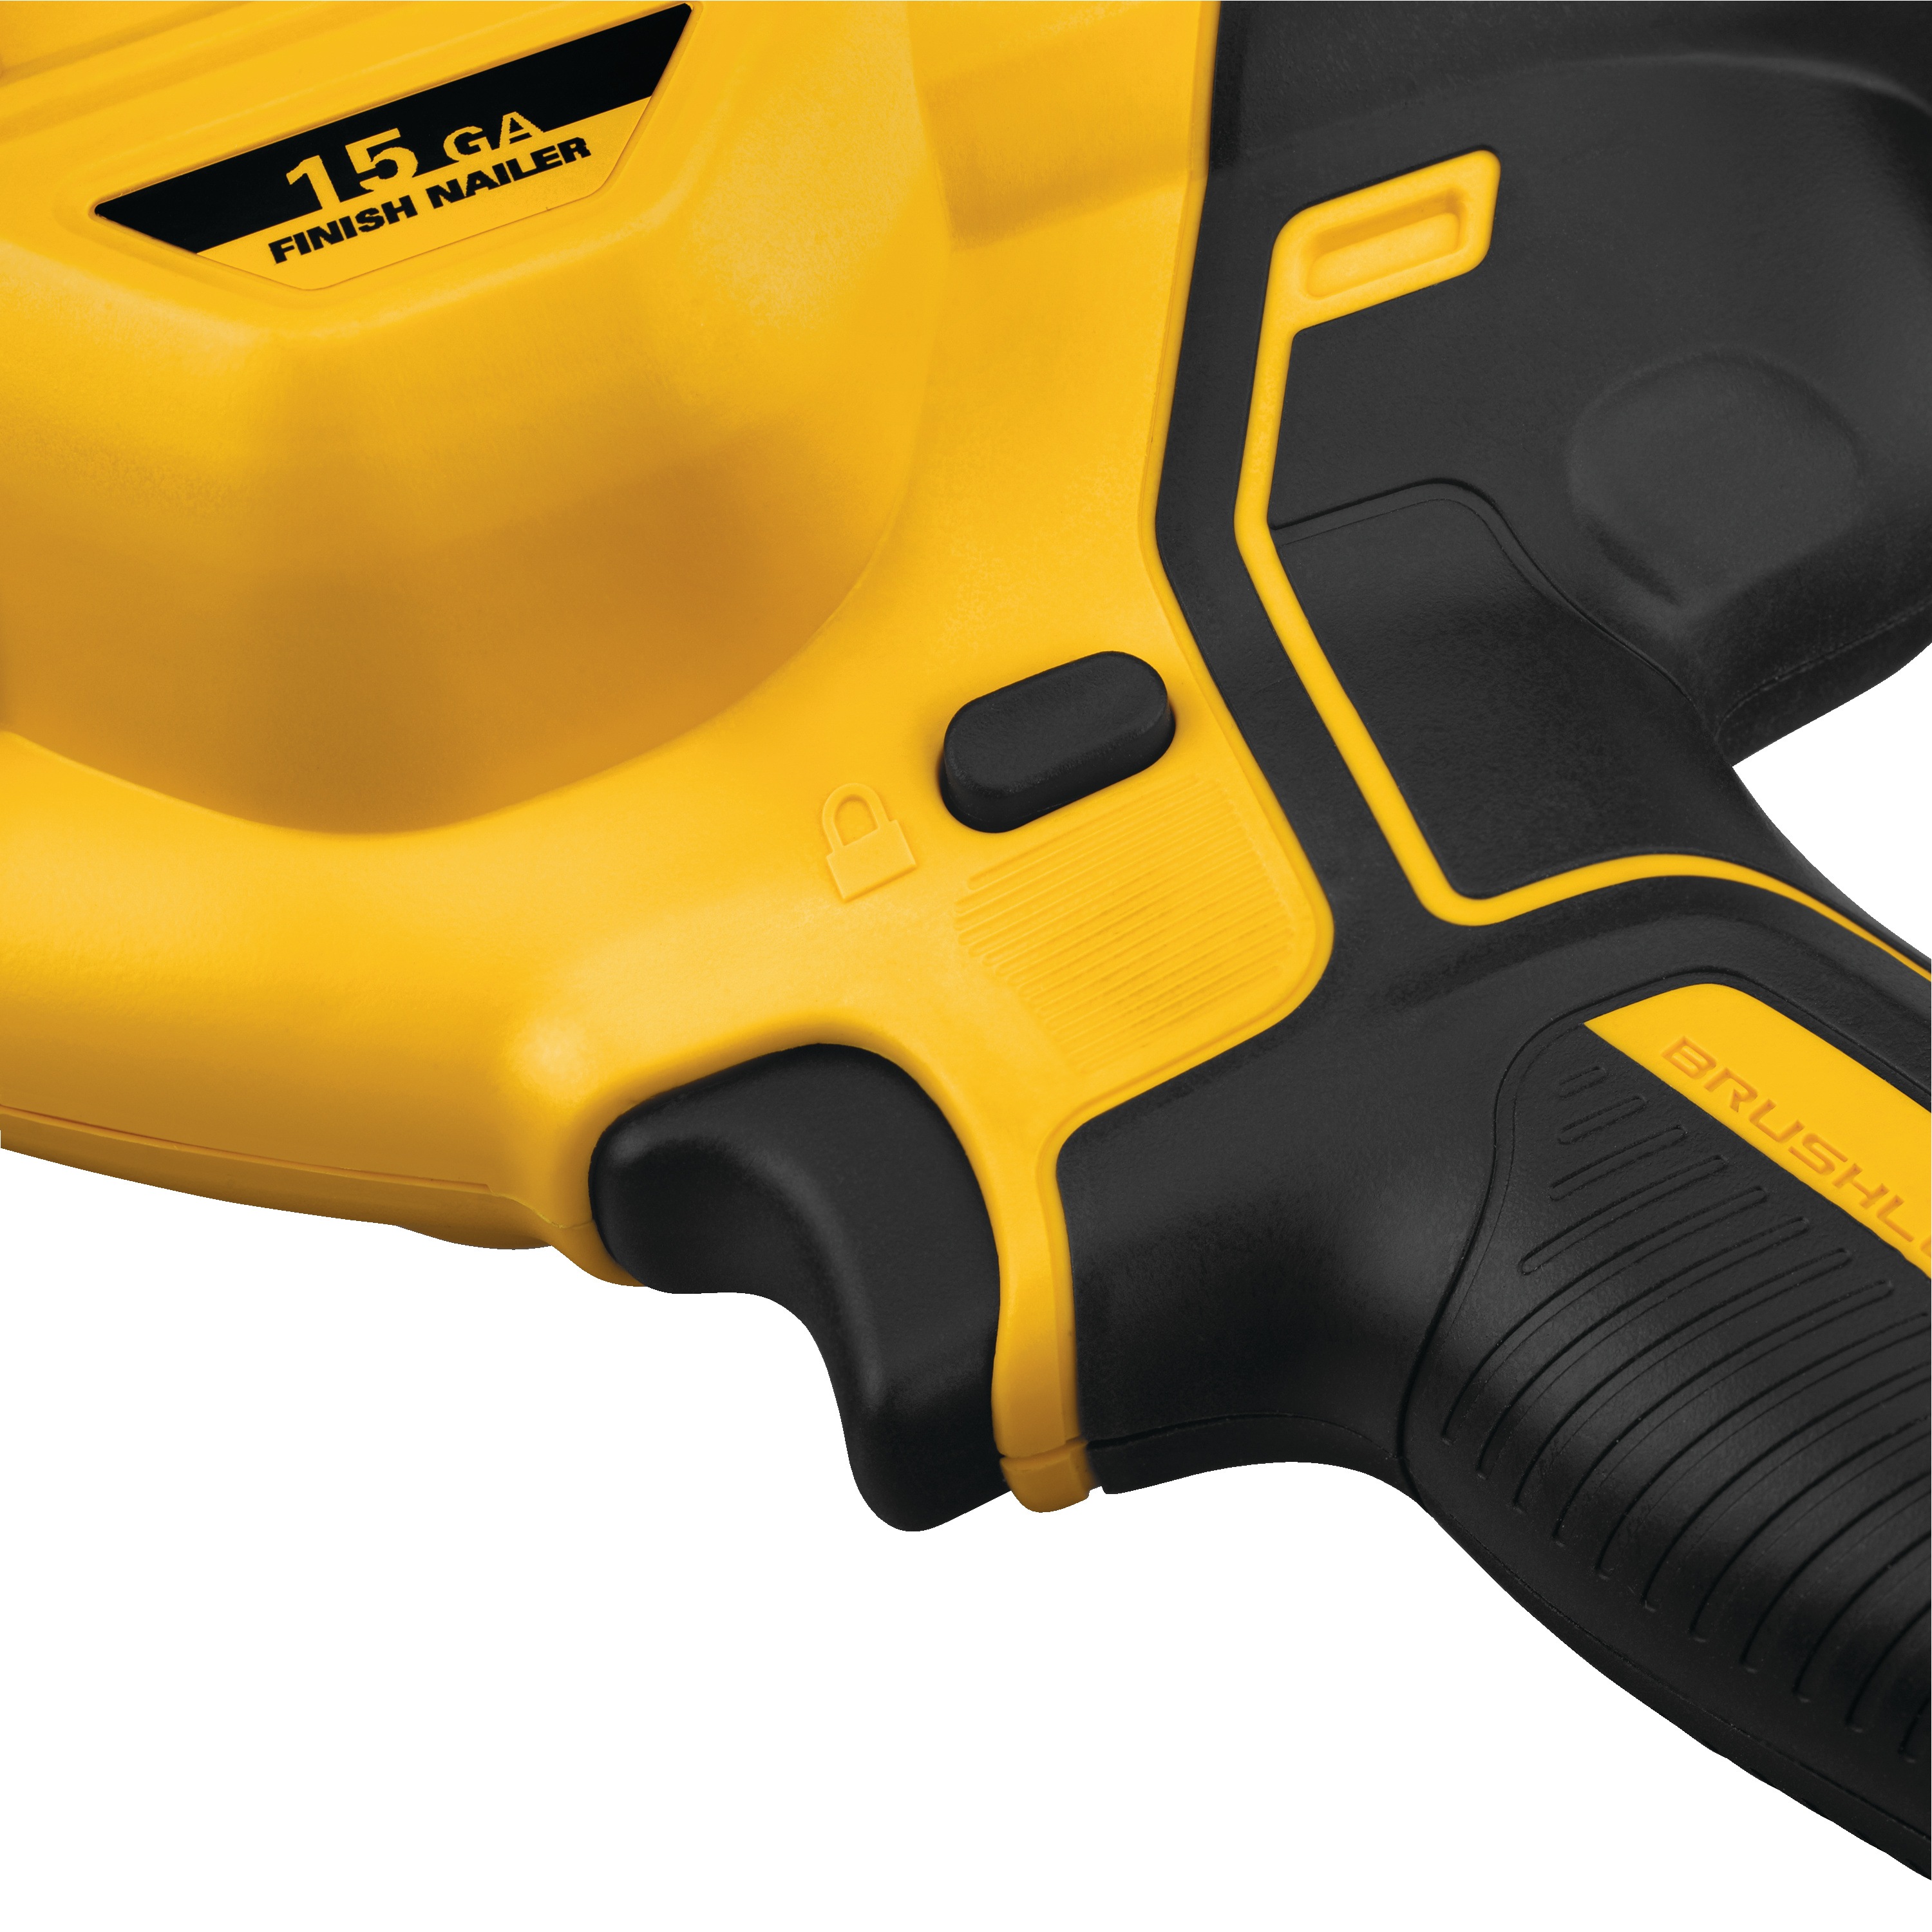 Close up of lock button feature of a  XR Cordless 15 Gauge Angled Finish Nailer